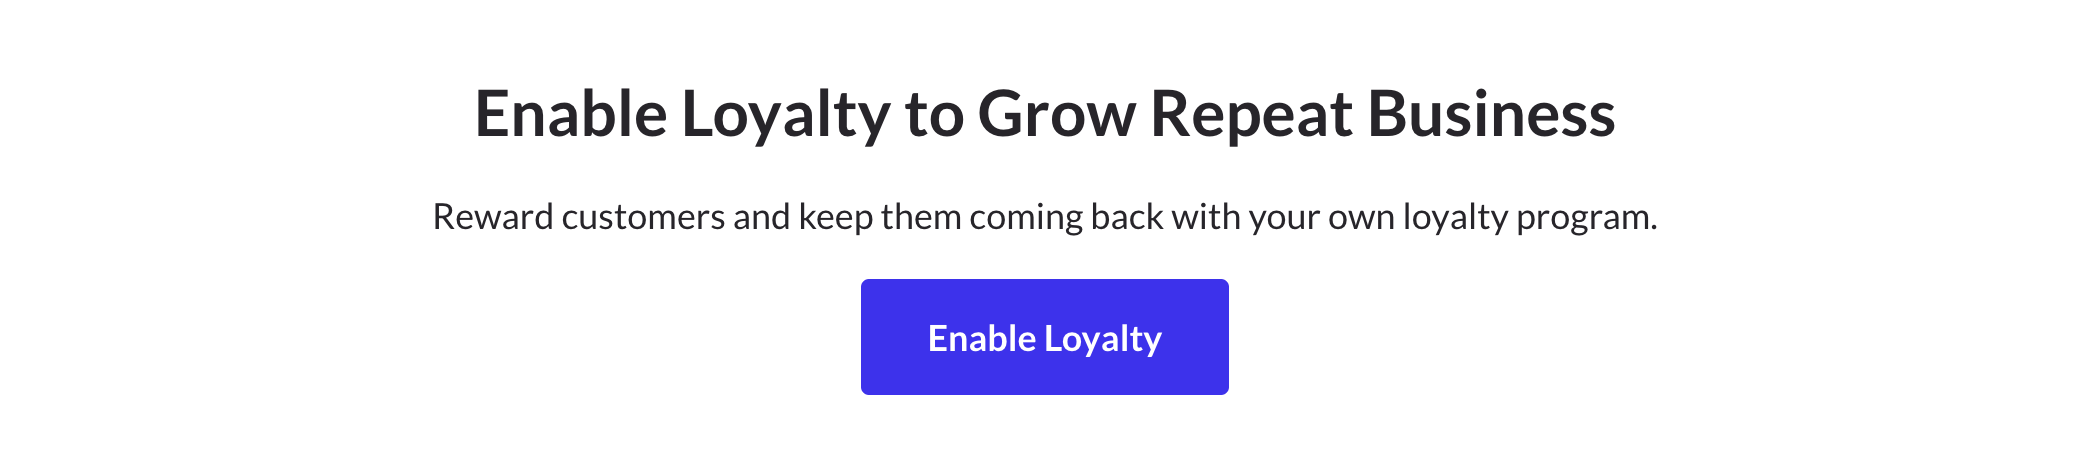 enable_loyalty.png